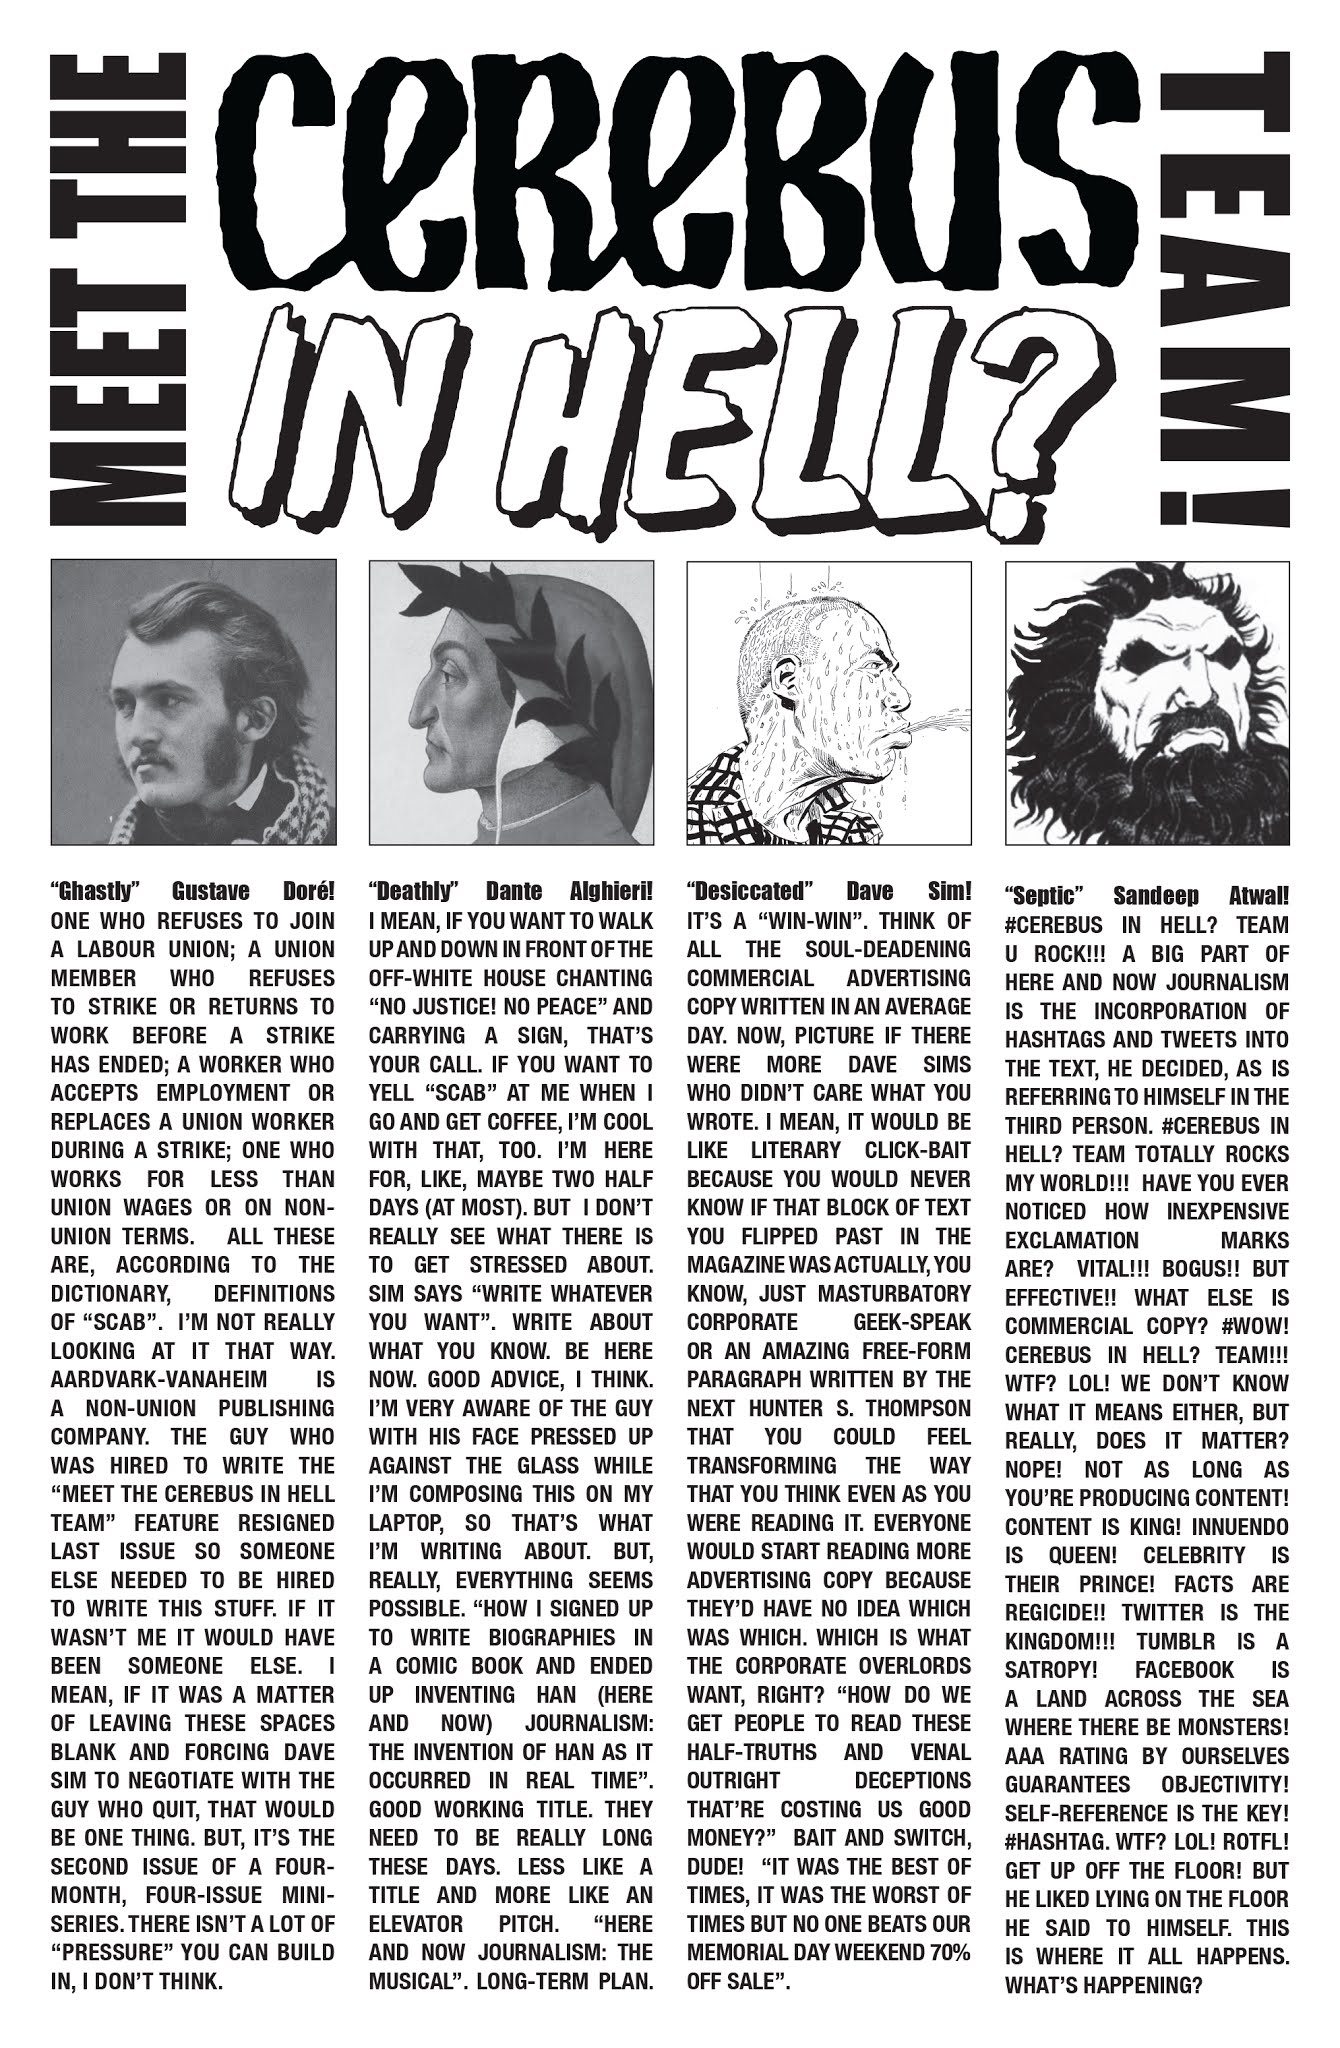 Read online Cerebus in Hell? comic -  Issue #2 - 26